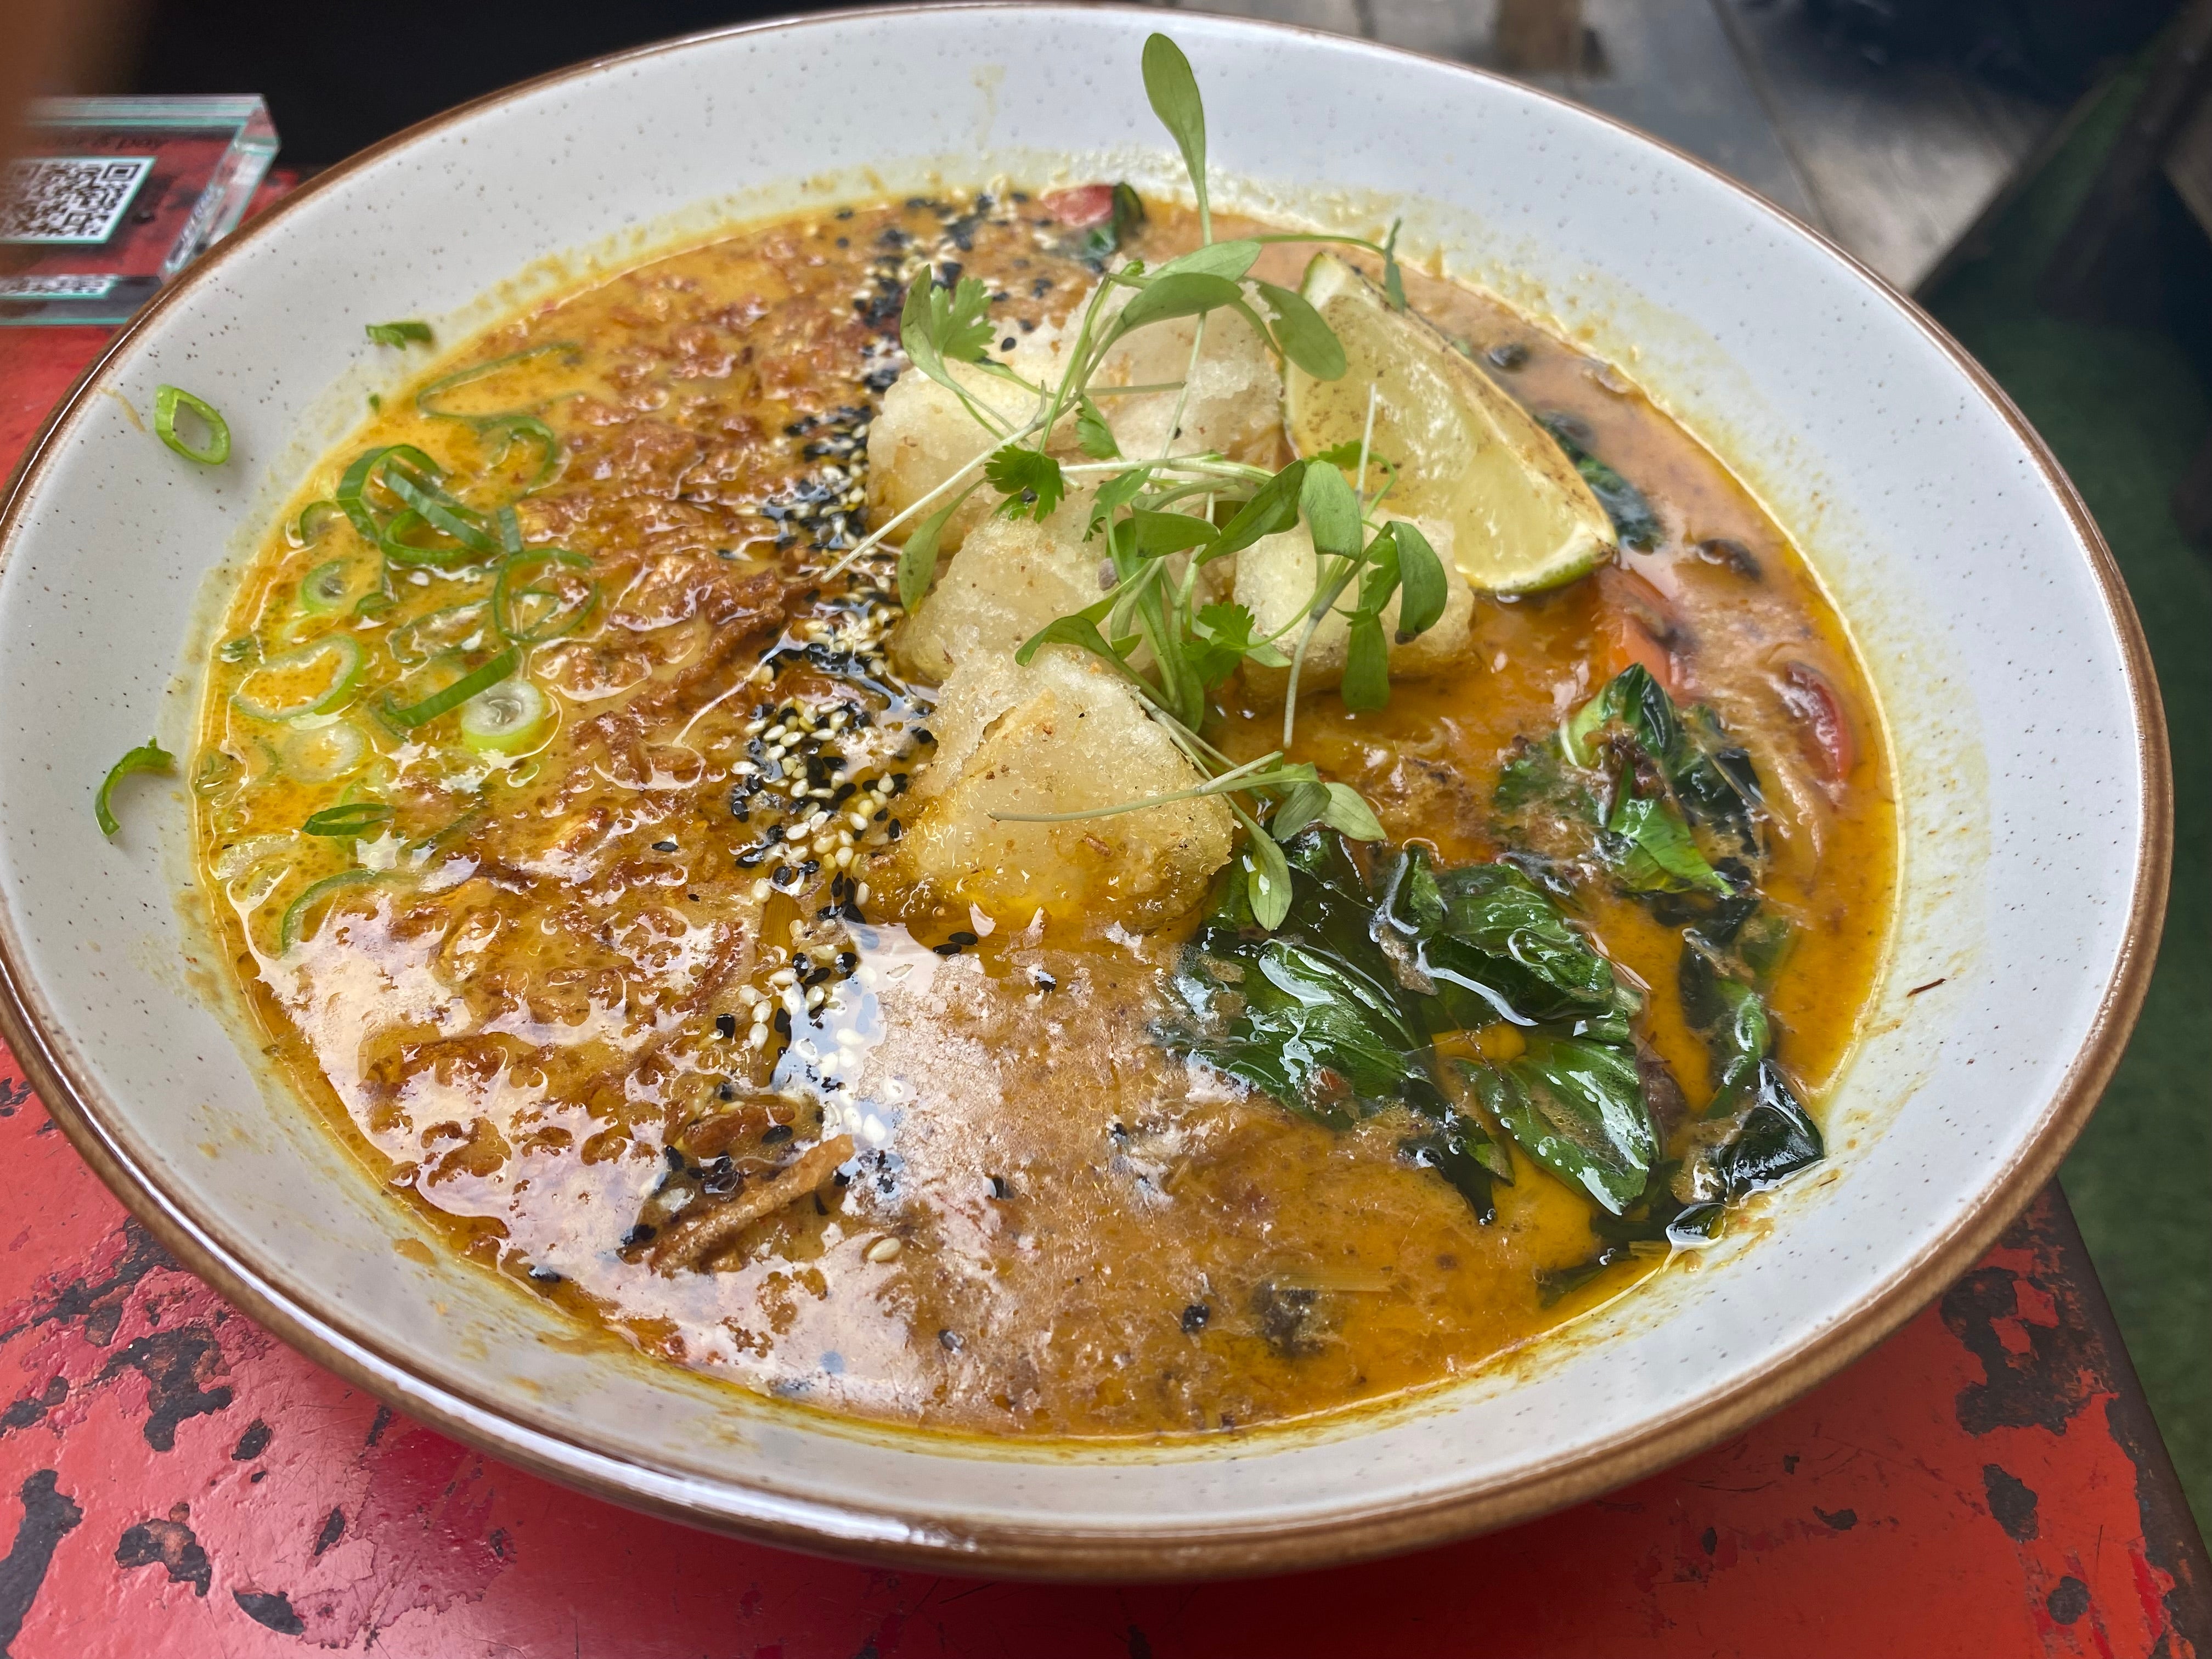 A favourite at Love Shack: the exquisitely presented coconut laksa